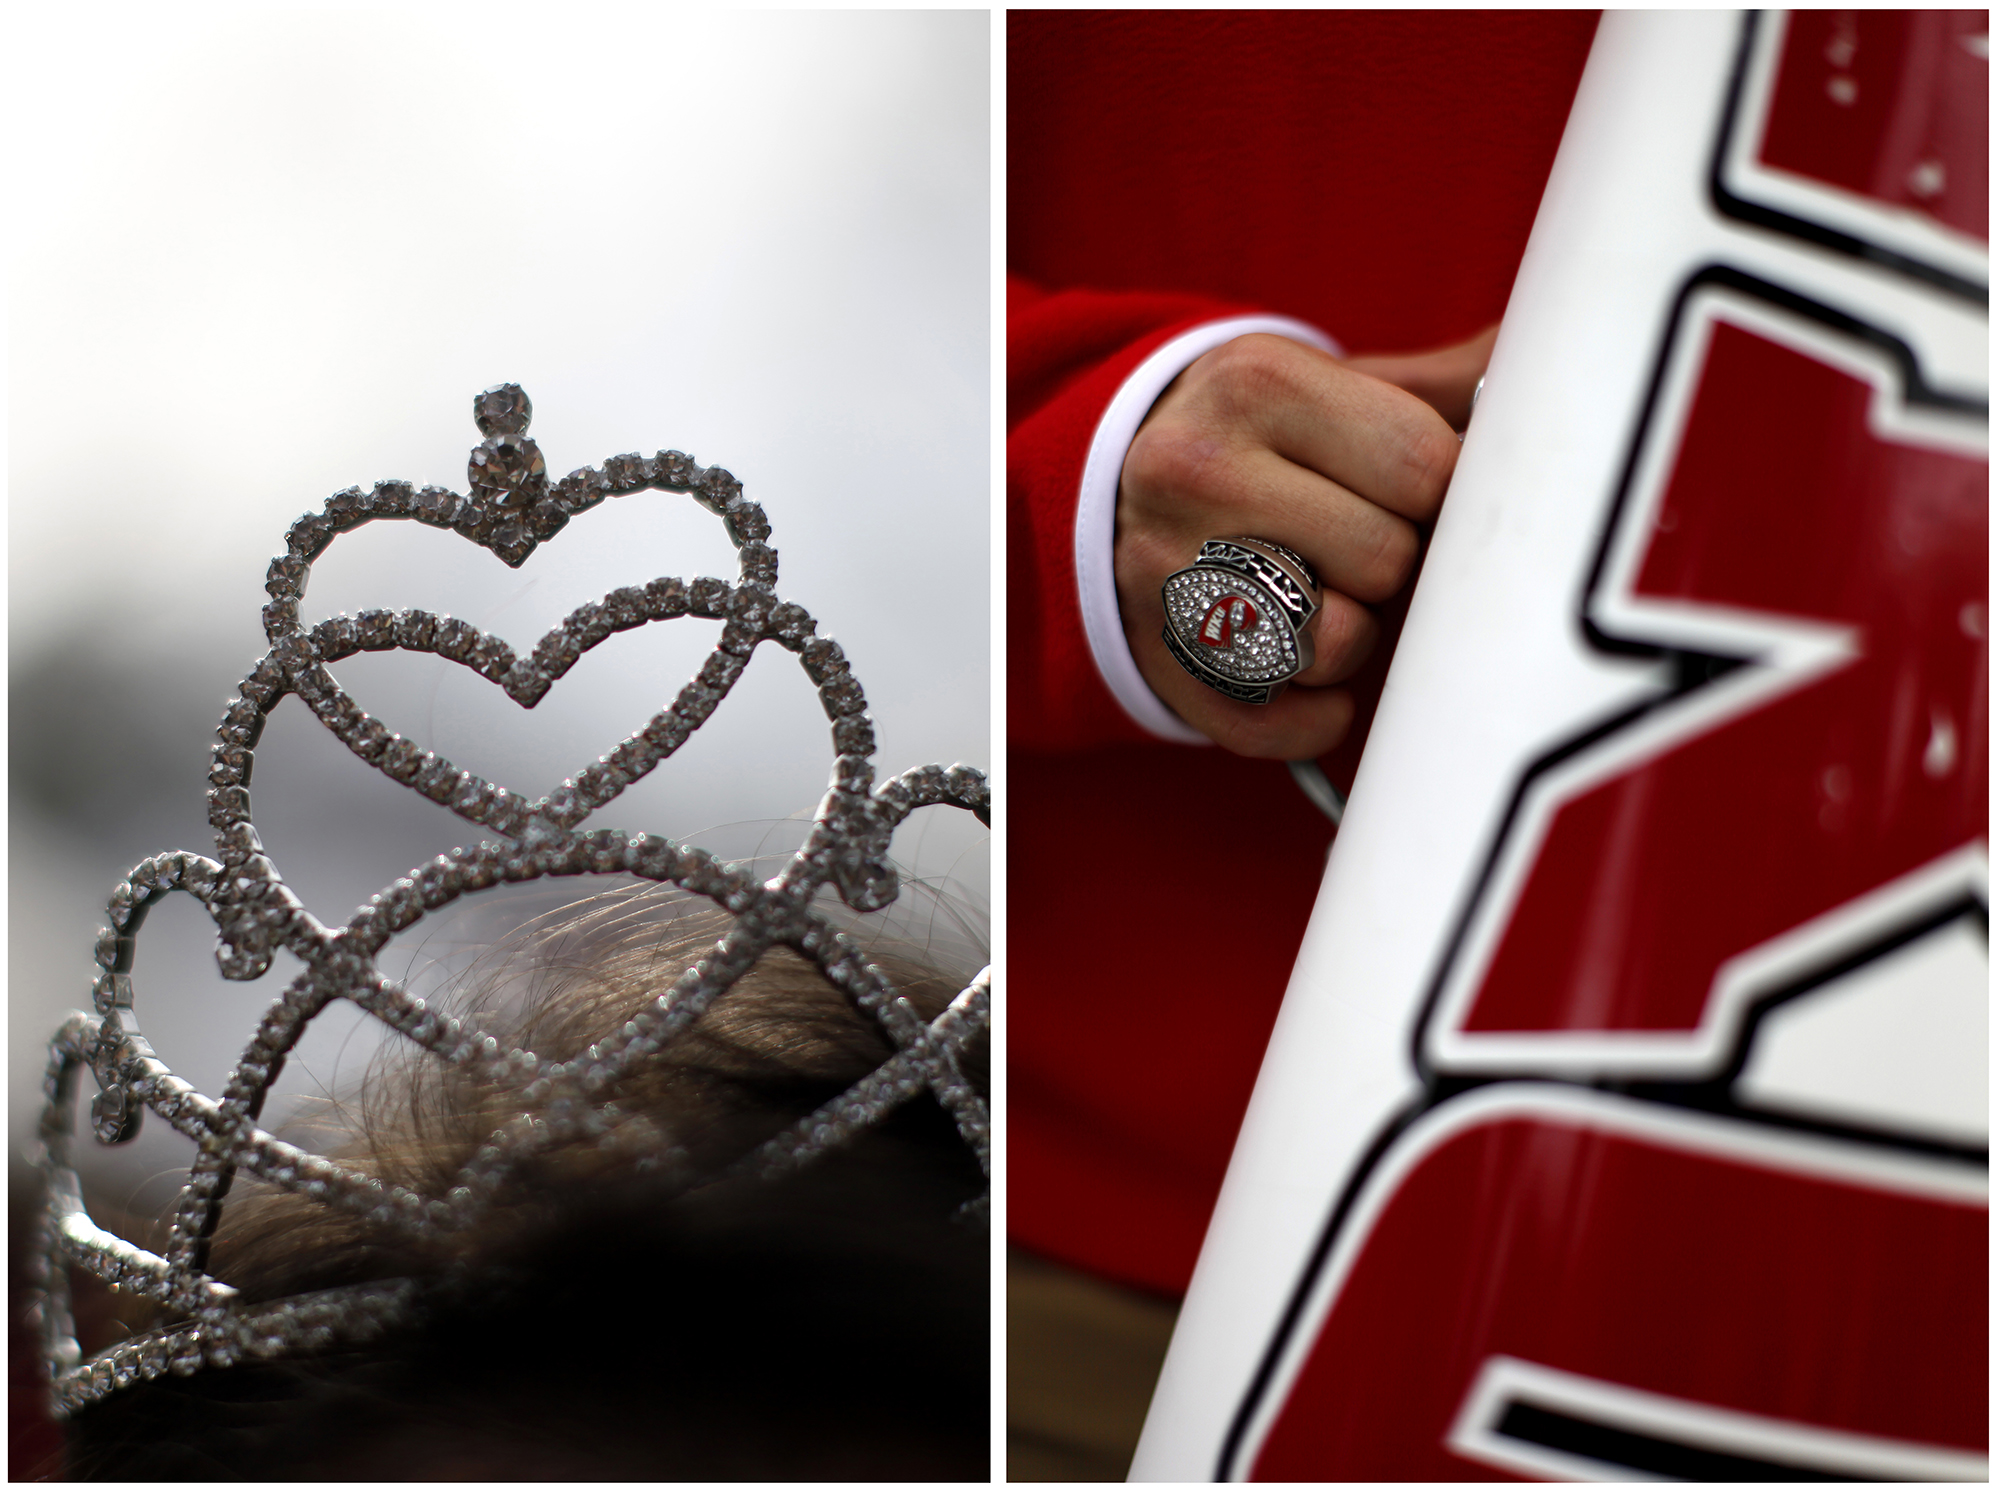  Left: Taylor Emberton, a Glasgow alumna and 2013 Homecoming Queen, wears her crown during tailgating festivities at Western Kentucky University on Saturday, Nov. 8, 2014. Right: &nbsp;Andrew Pettijohn, WKU alumnus, wears his 2012 Little Caesar's Bow